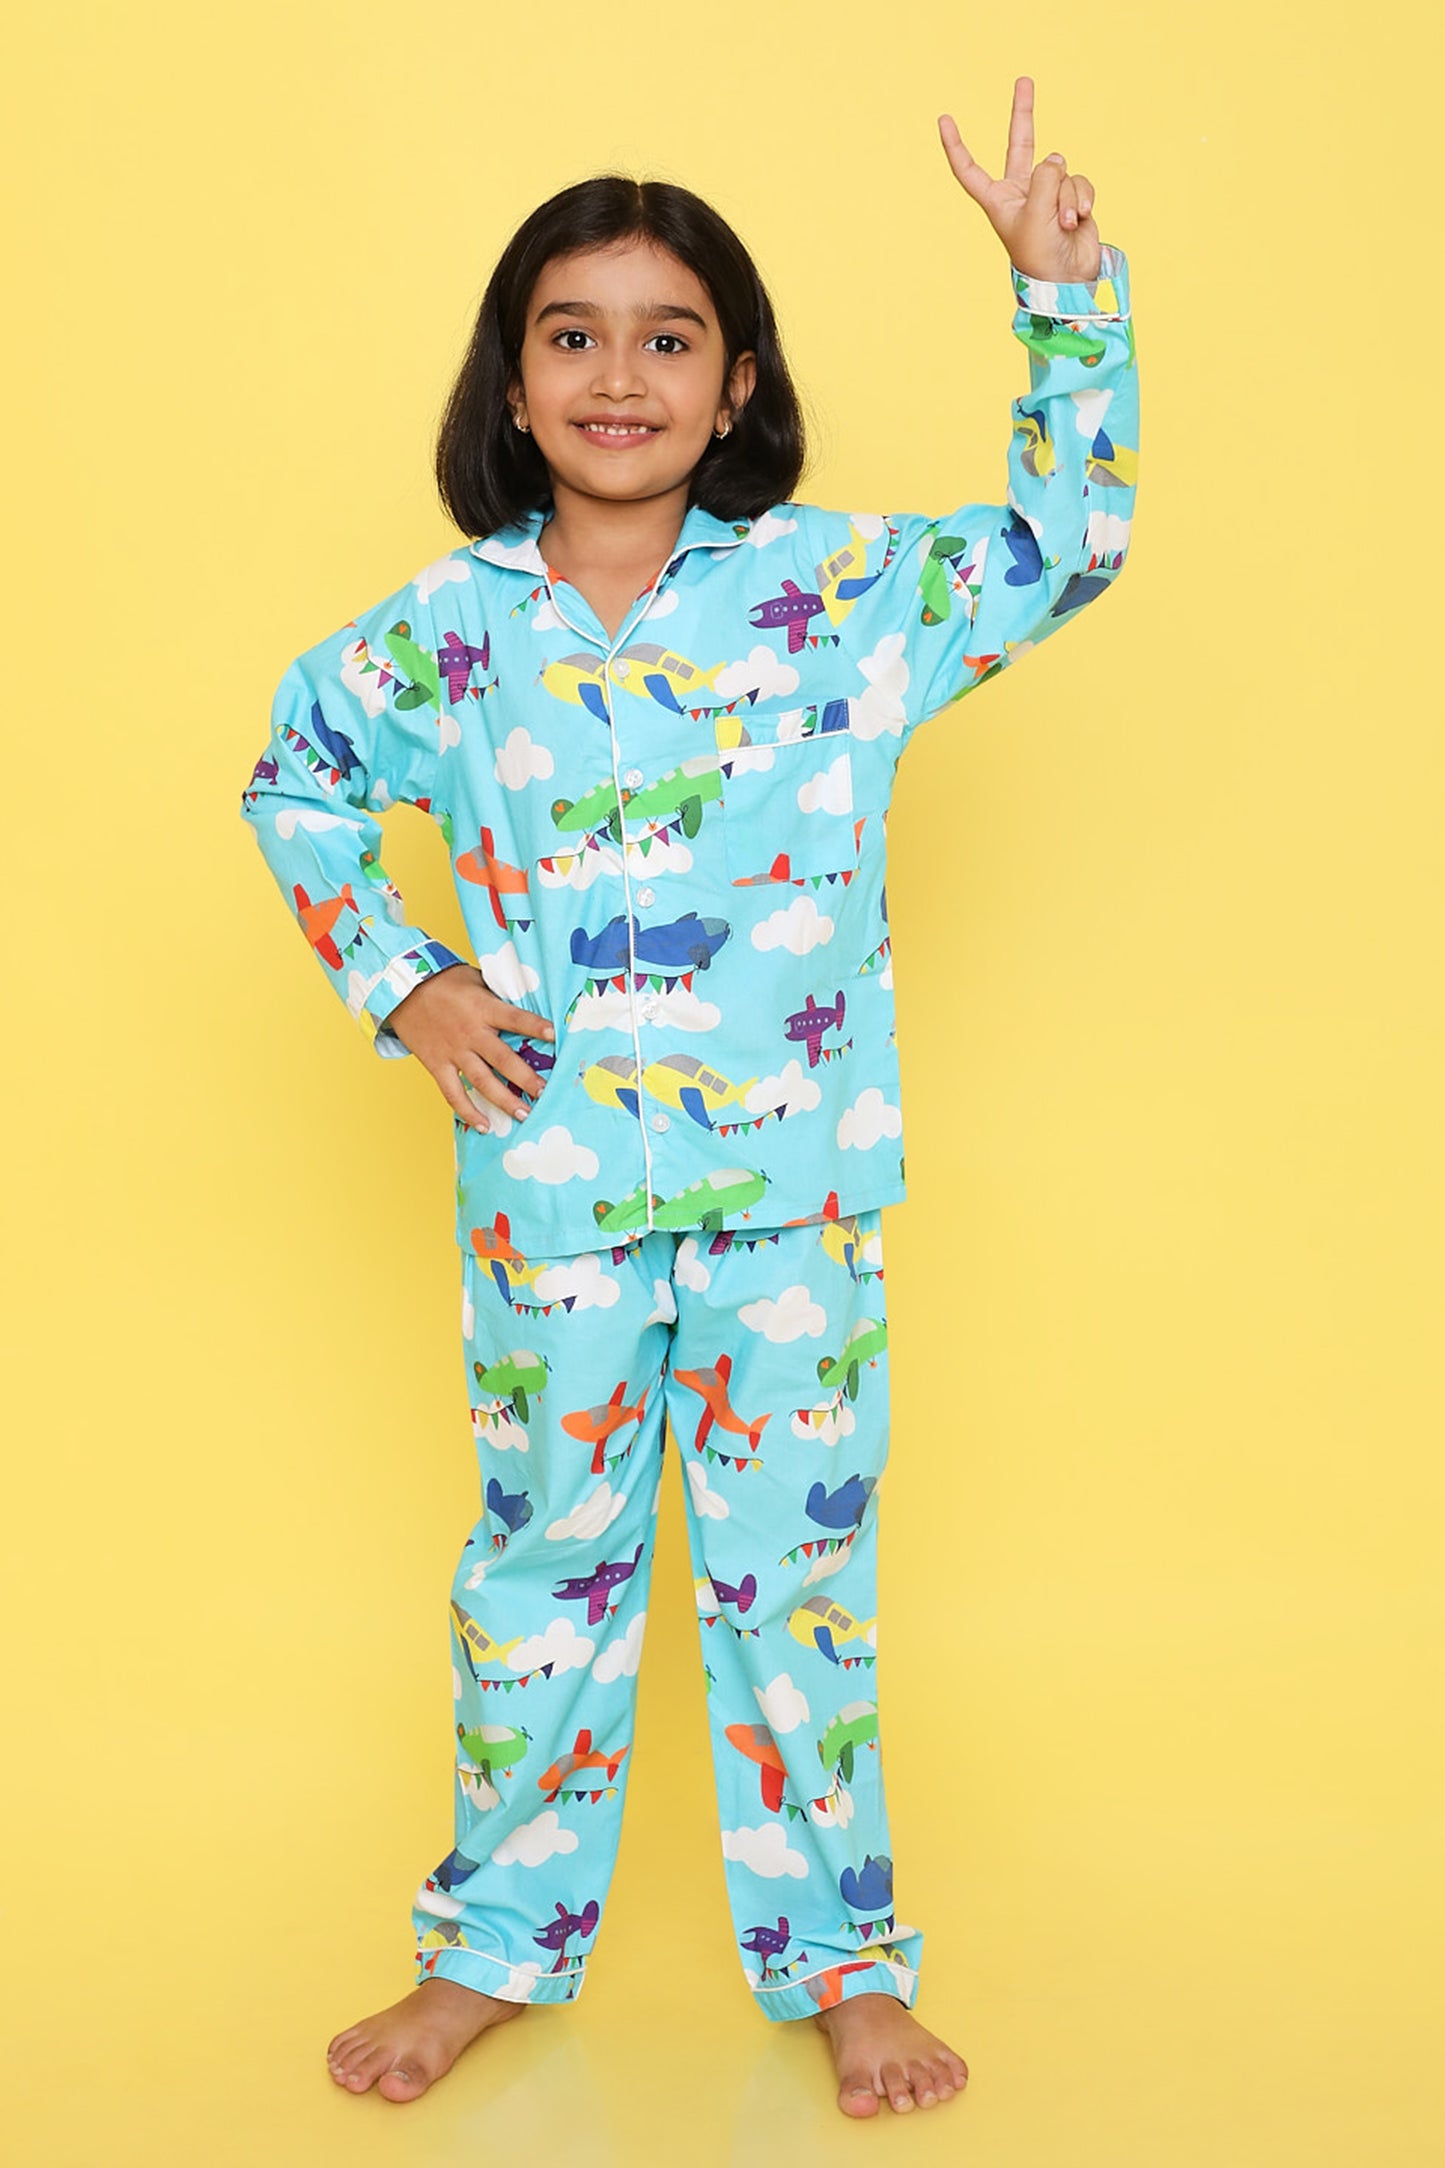 Knitting Doodles Premium cotton Kids' Notched Collar Night suit in cute Aeroplanes  Print- Blue